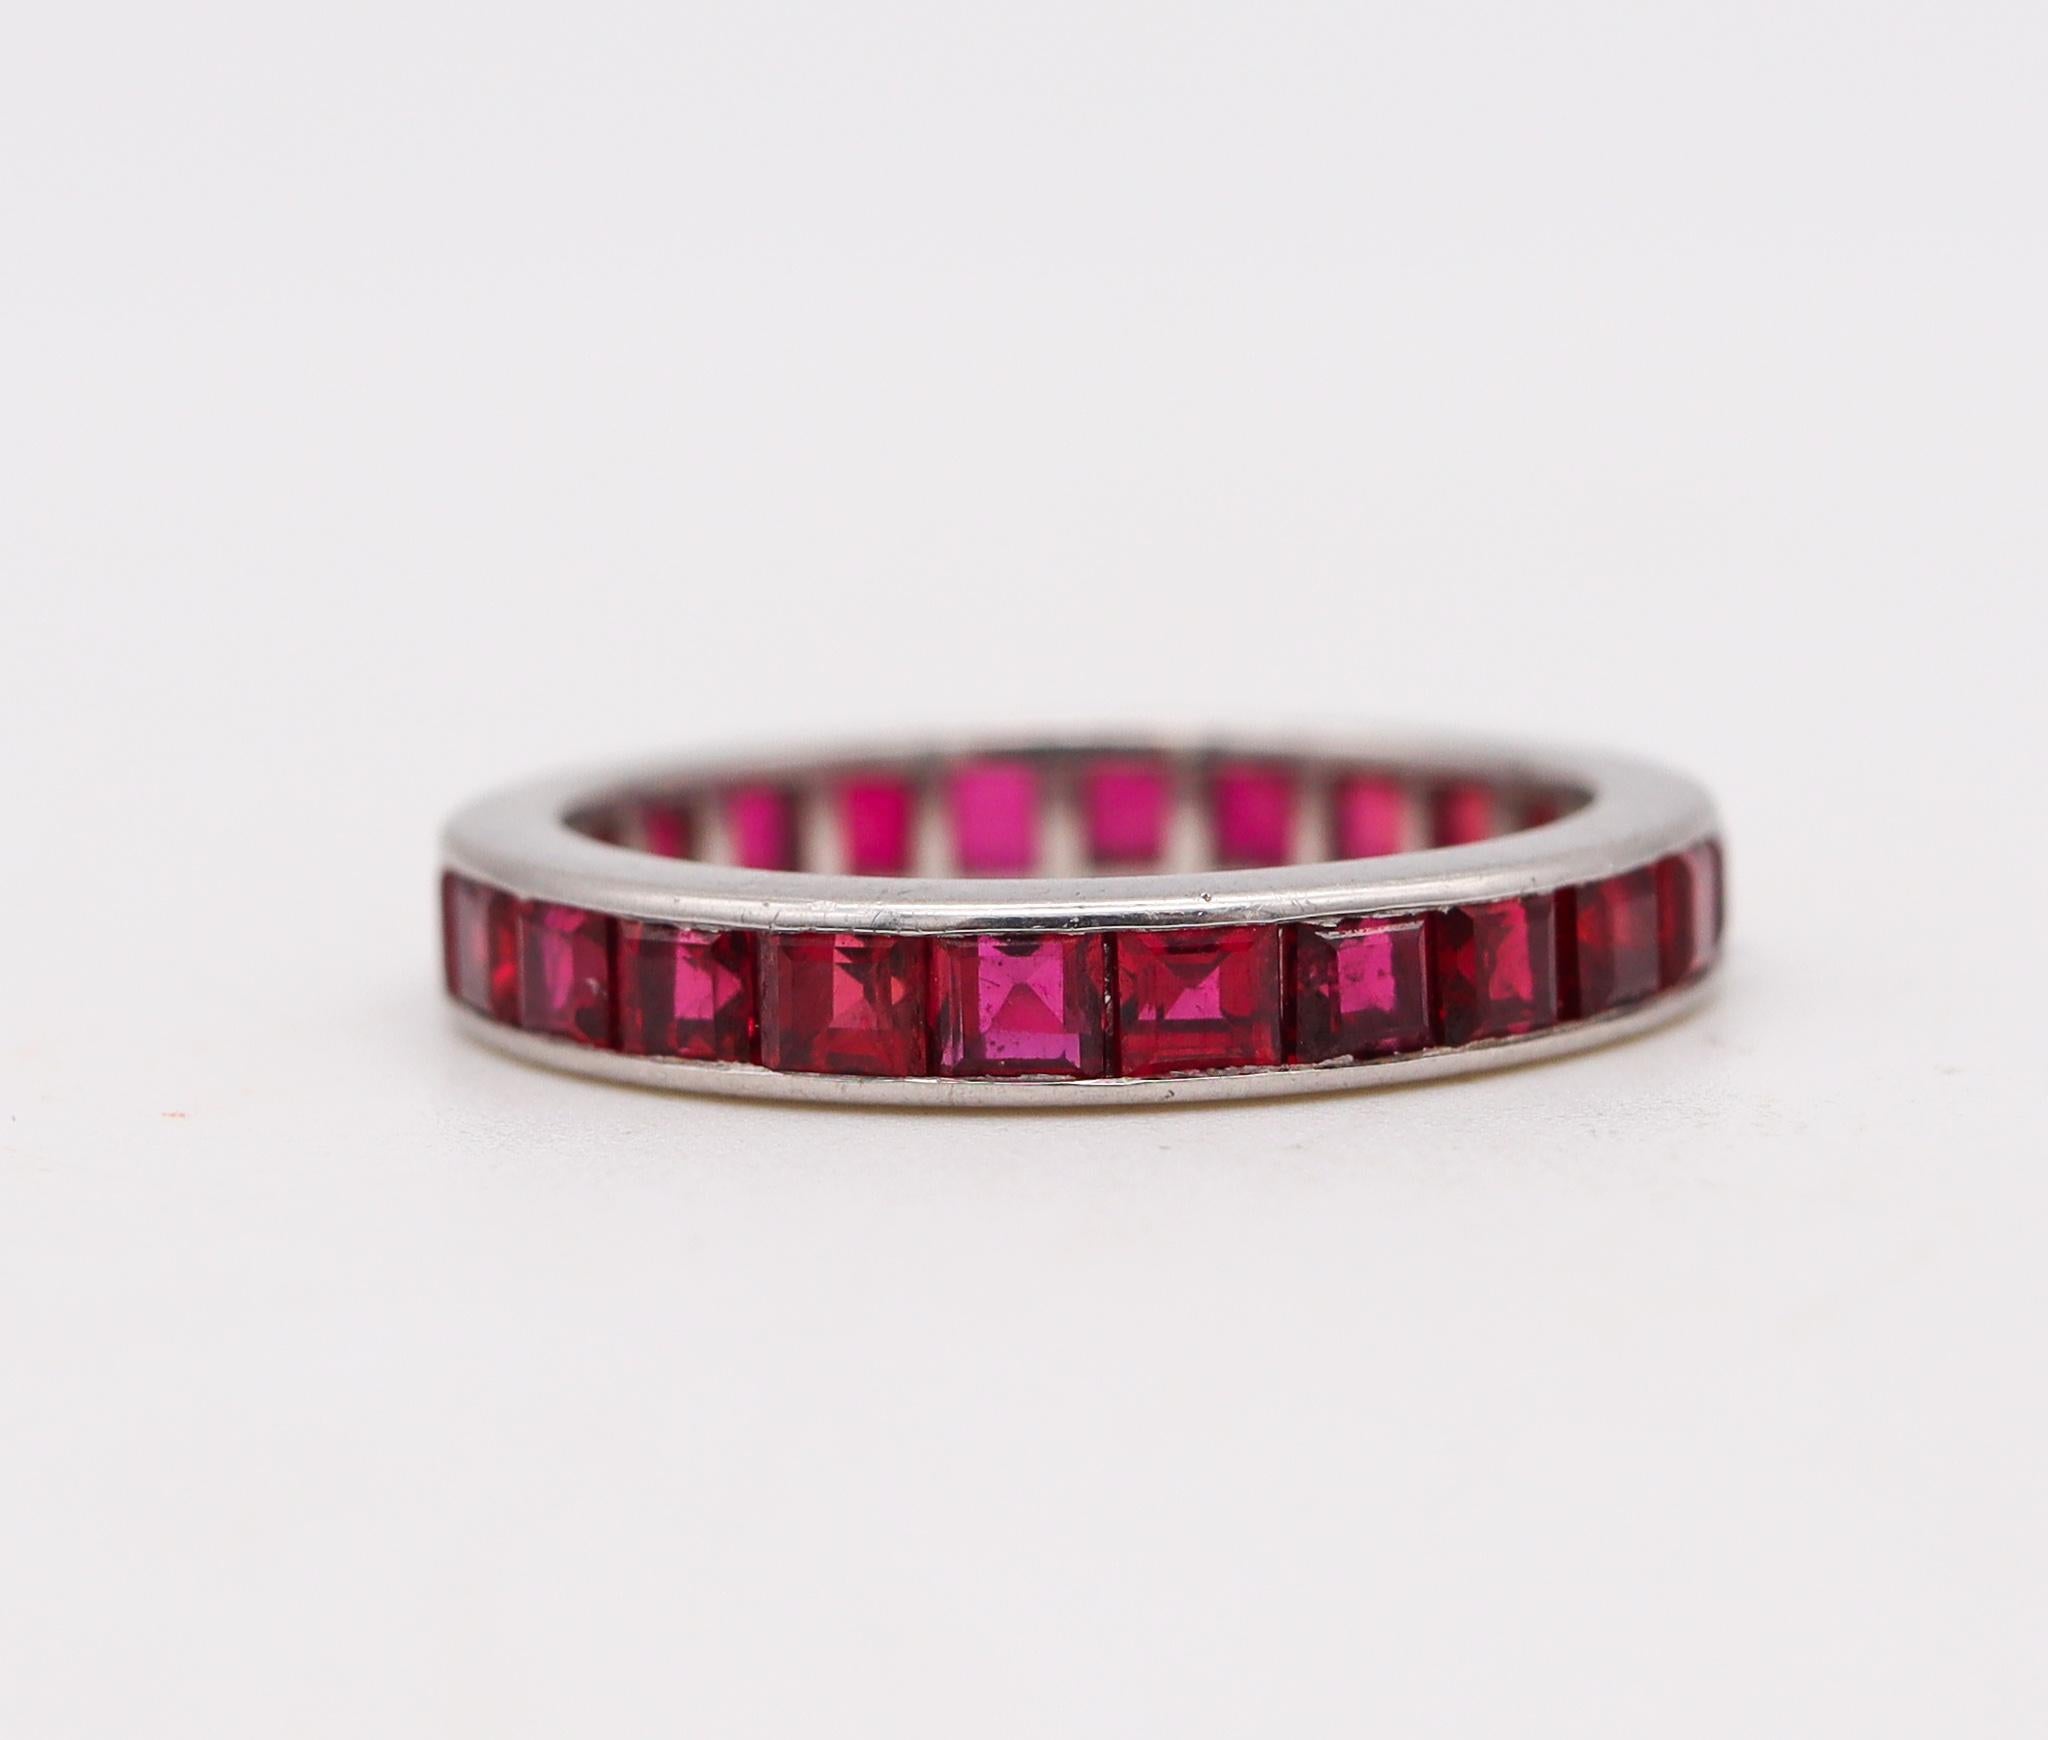 French Cut Art Deco 1930 Eternity Band Ring In Platinum With 2.41 Cts In Vivid Red Rubies